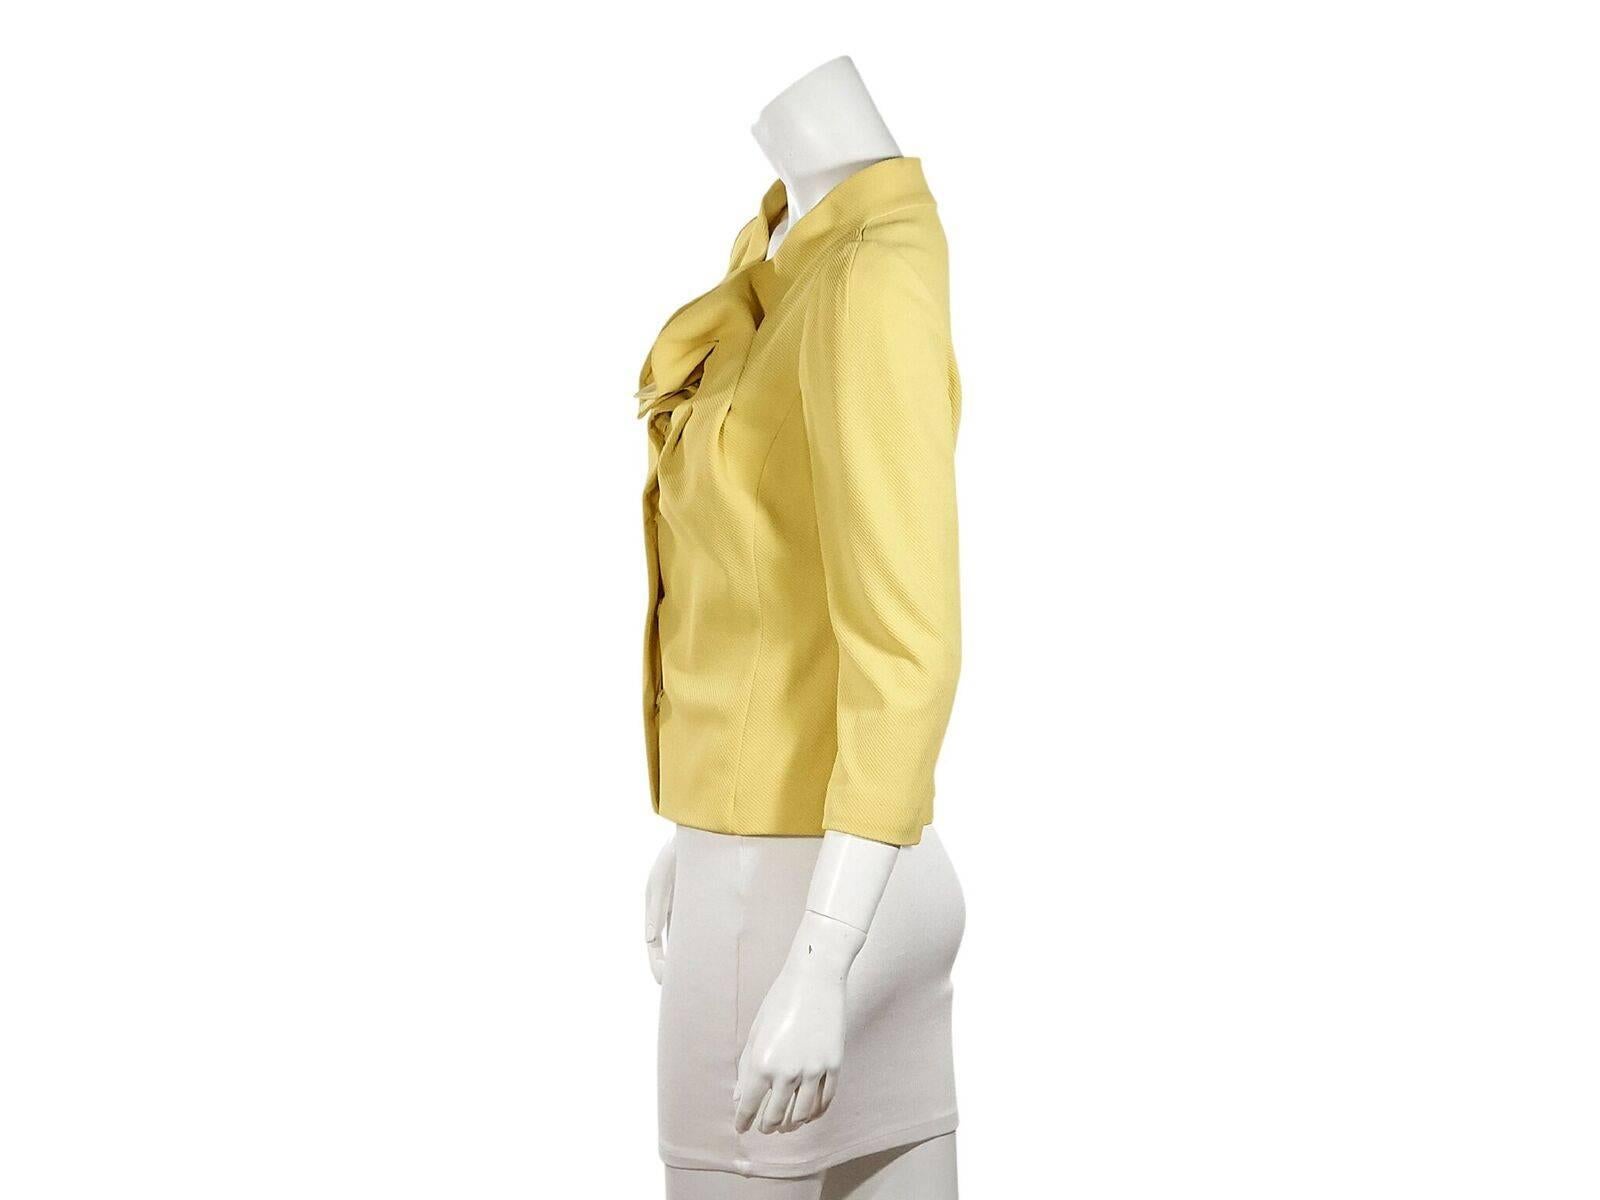 Product details:  Yellow textured jacket by Fendi.  Pleated ruffle collar.  Three-quarter sleeves.  Concealed front closure.  38